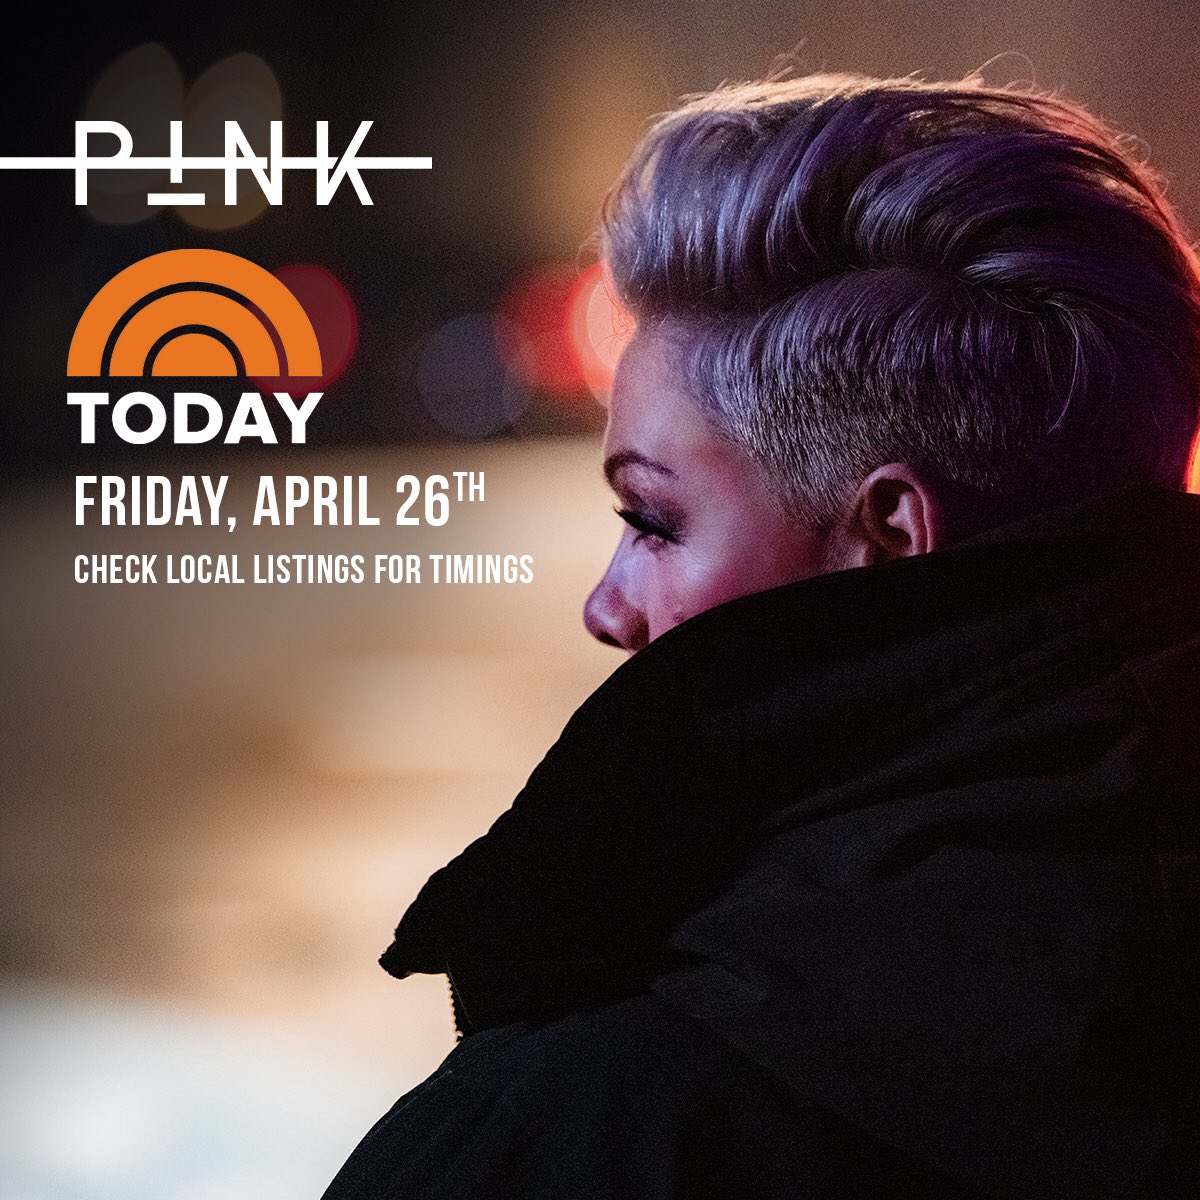 ☕Catch me bright and early on @thetodayshow tomorrow morning talking about #Hurts2BHuman on release day! https://t.co/5S3ggGc6RI